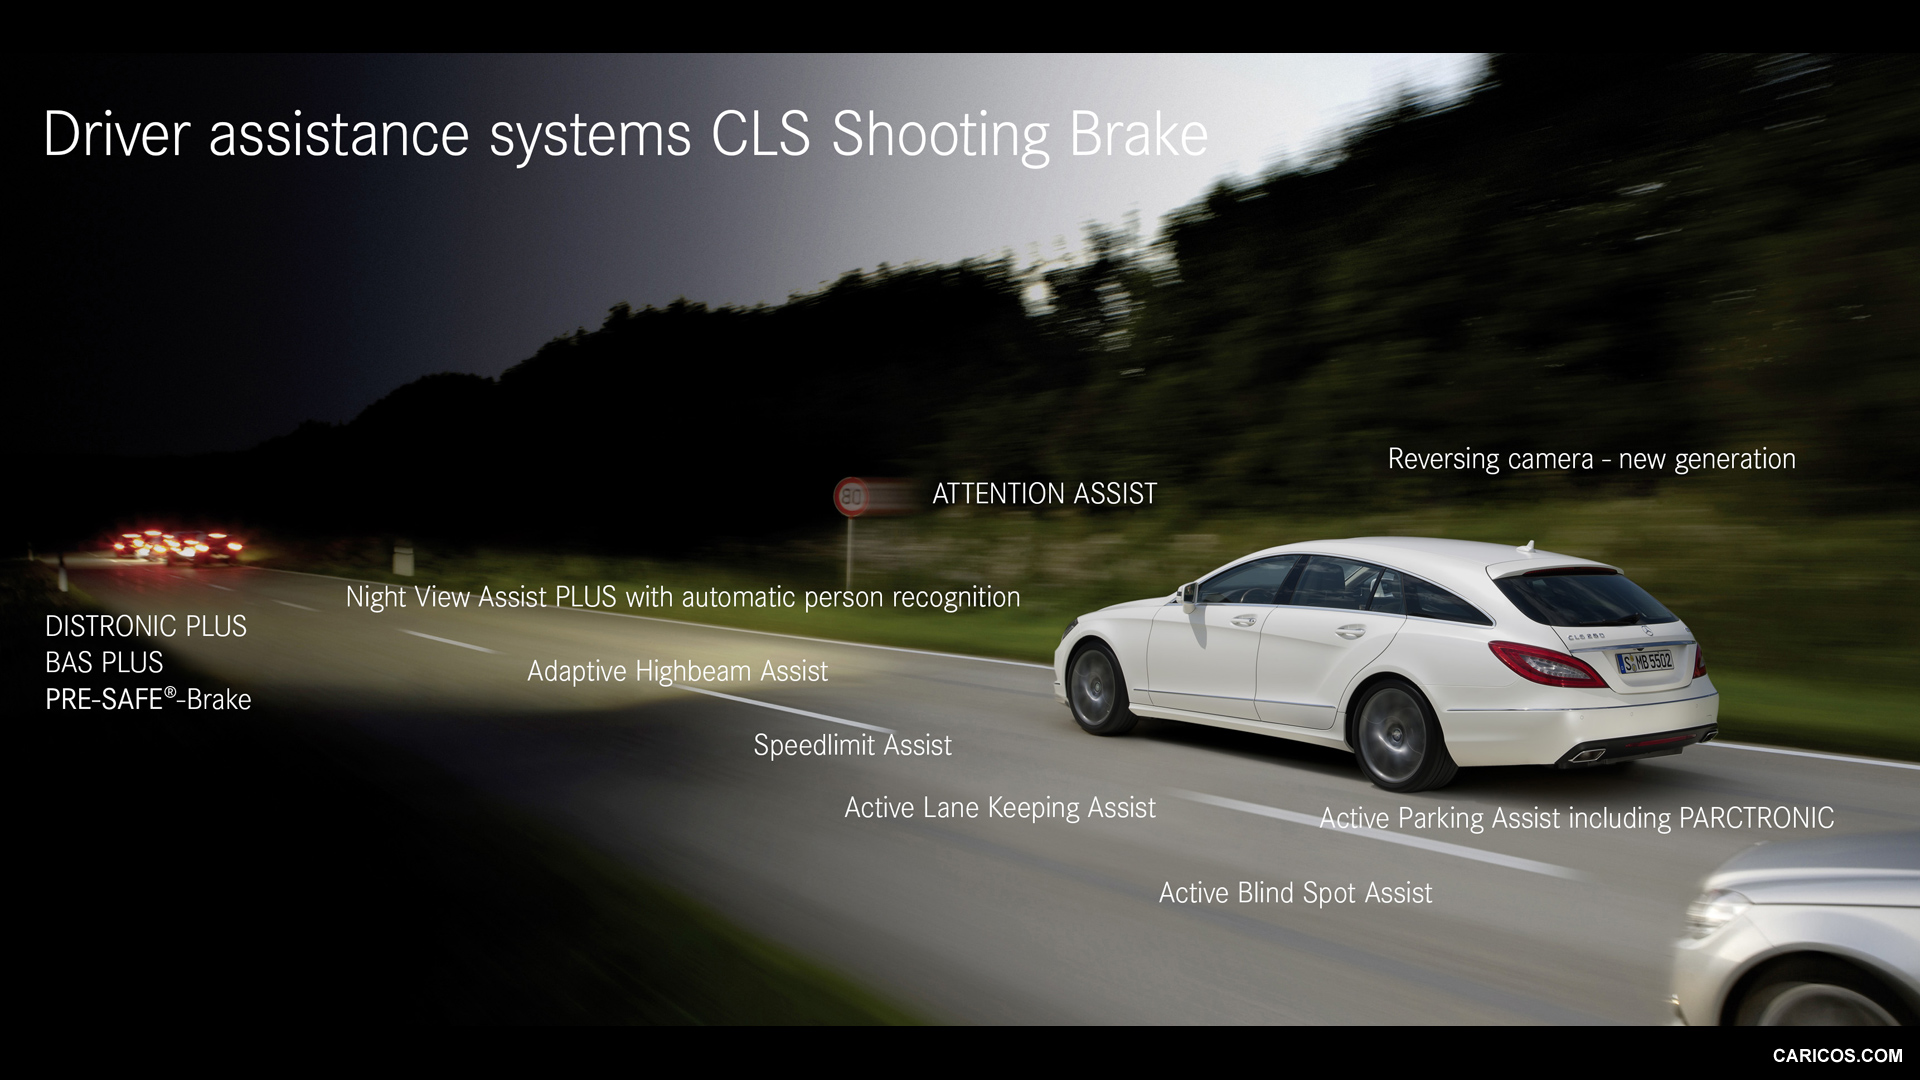 2013 Mercedes-Benz CLS Shooting Brake - Driver Assistance Systems - , #133 of 184